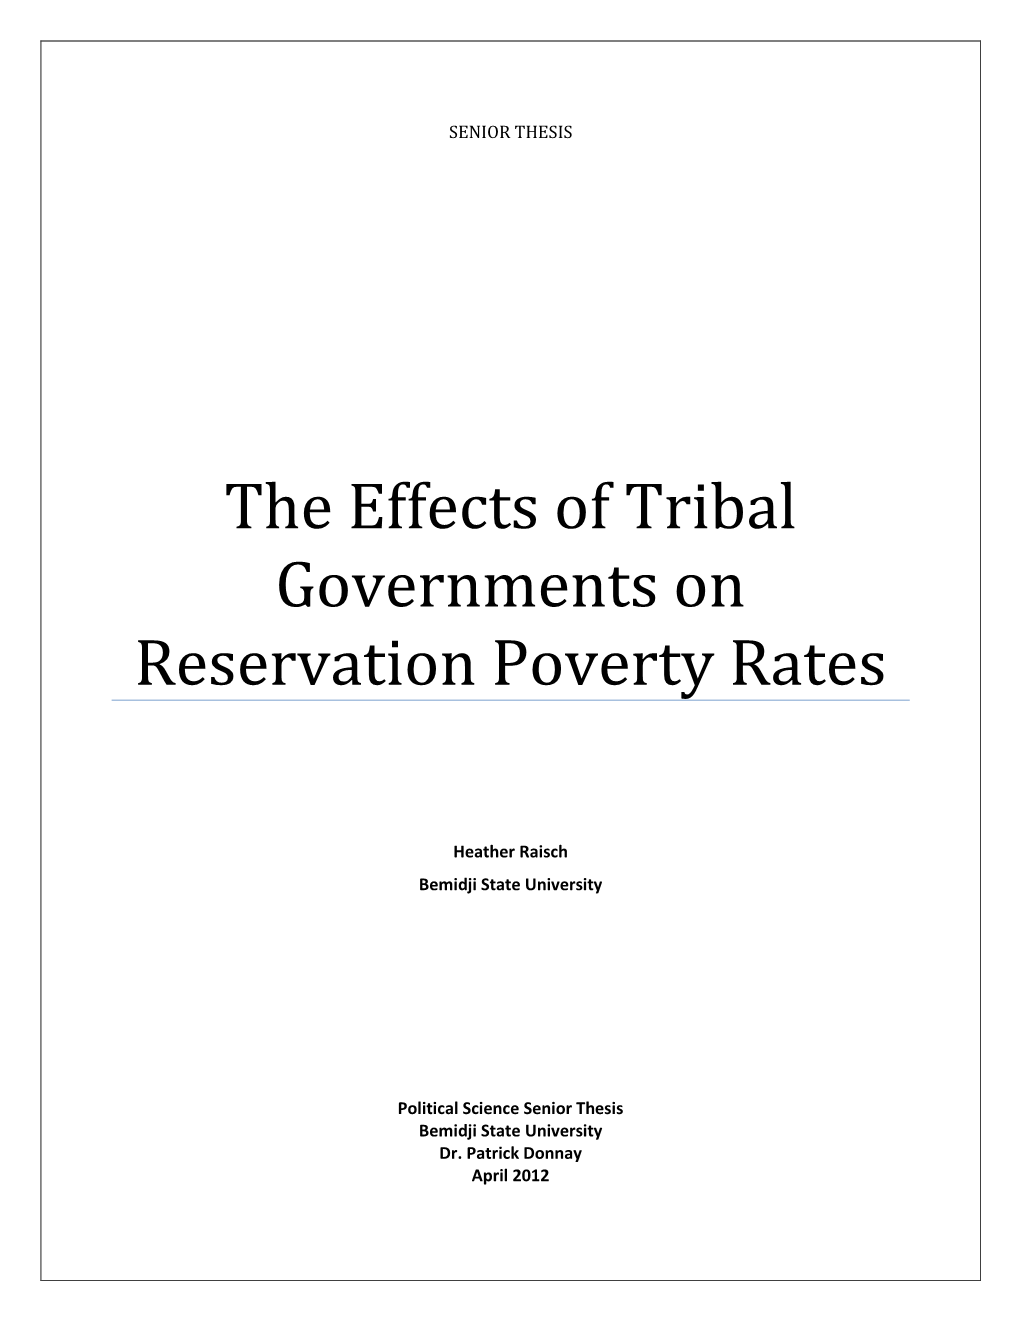 The Effects of Tribal Governments on Reservation Poverty Rates